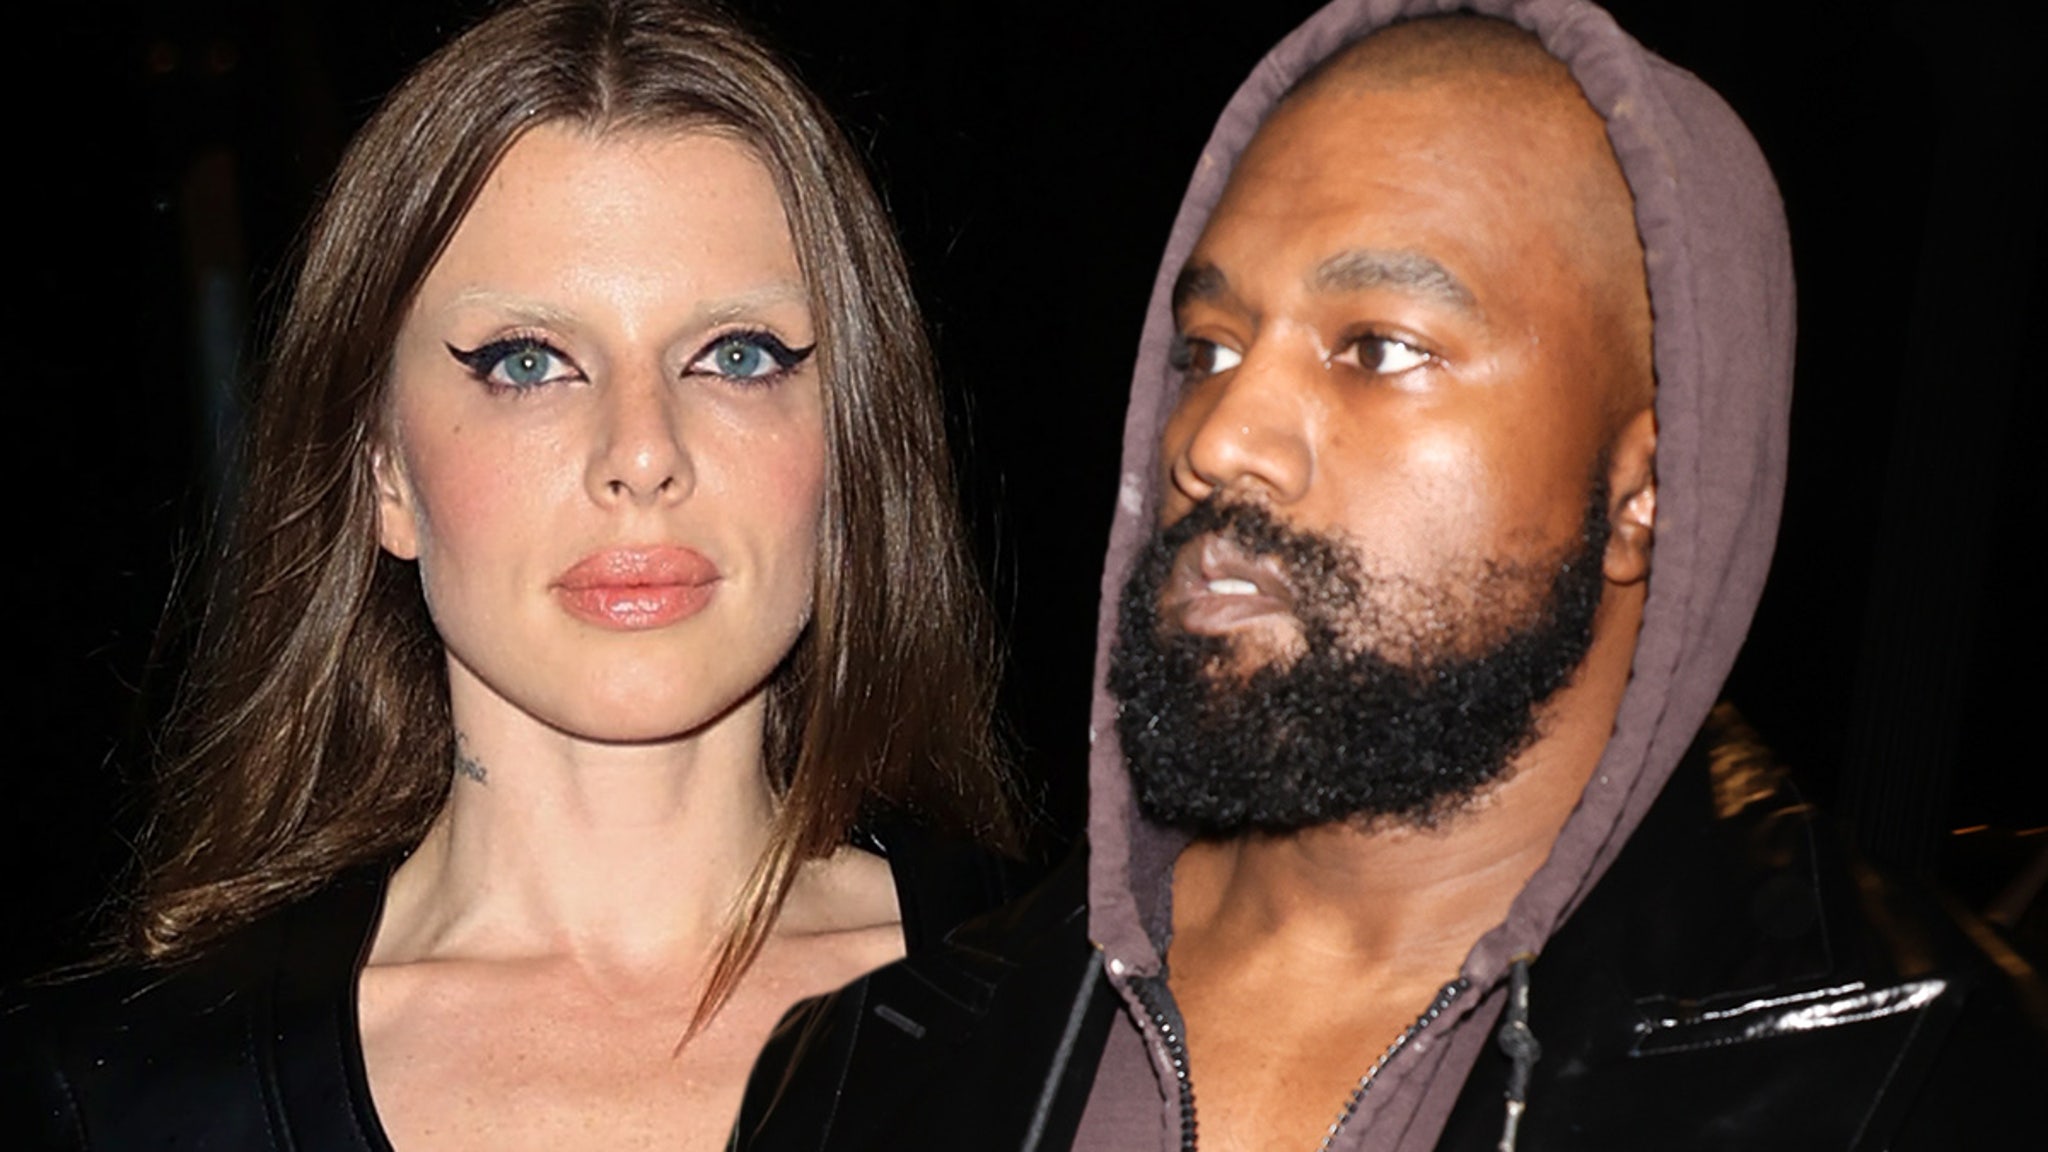 Kanye West and Julia Fox breakup: There was one clear genius in this  relationship.